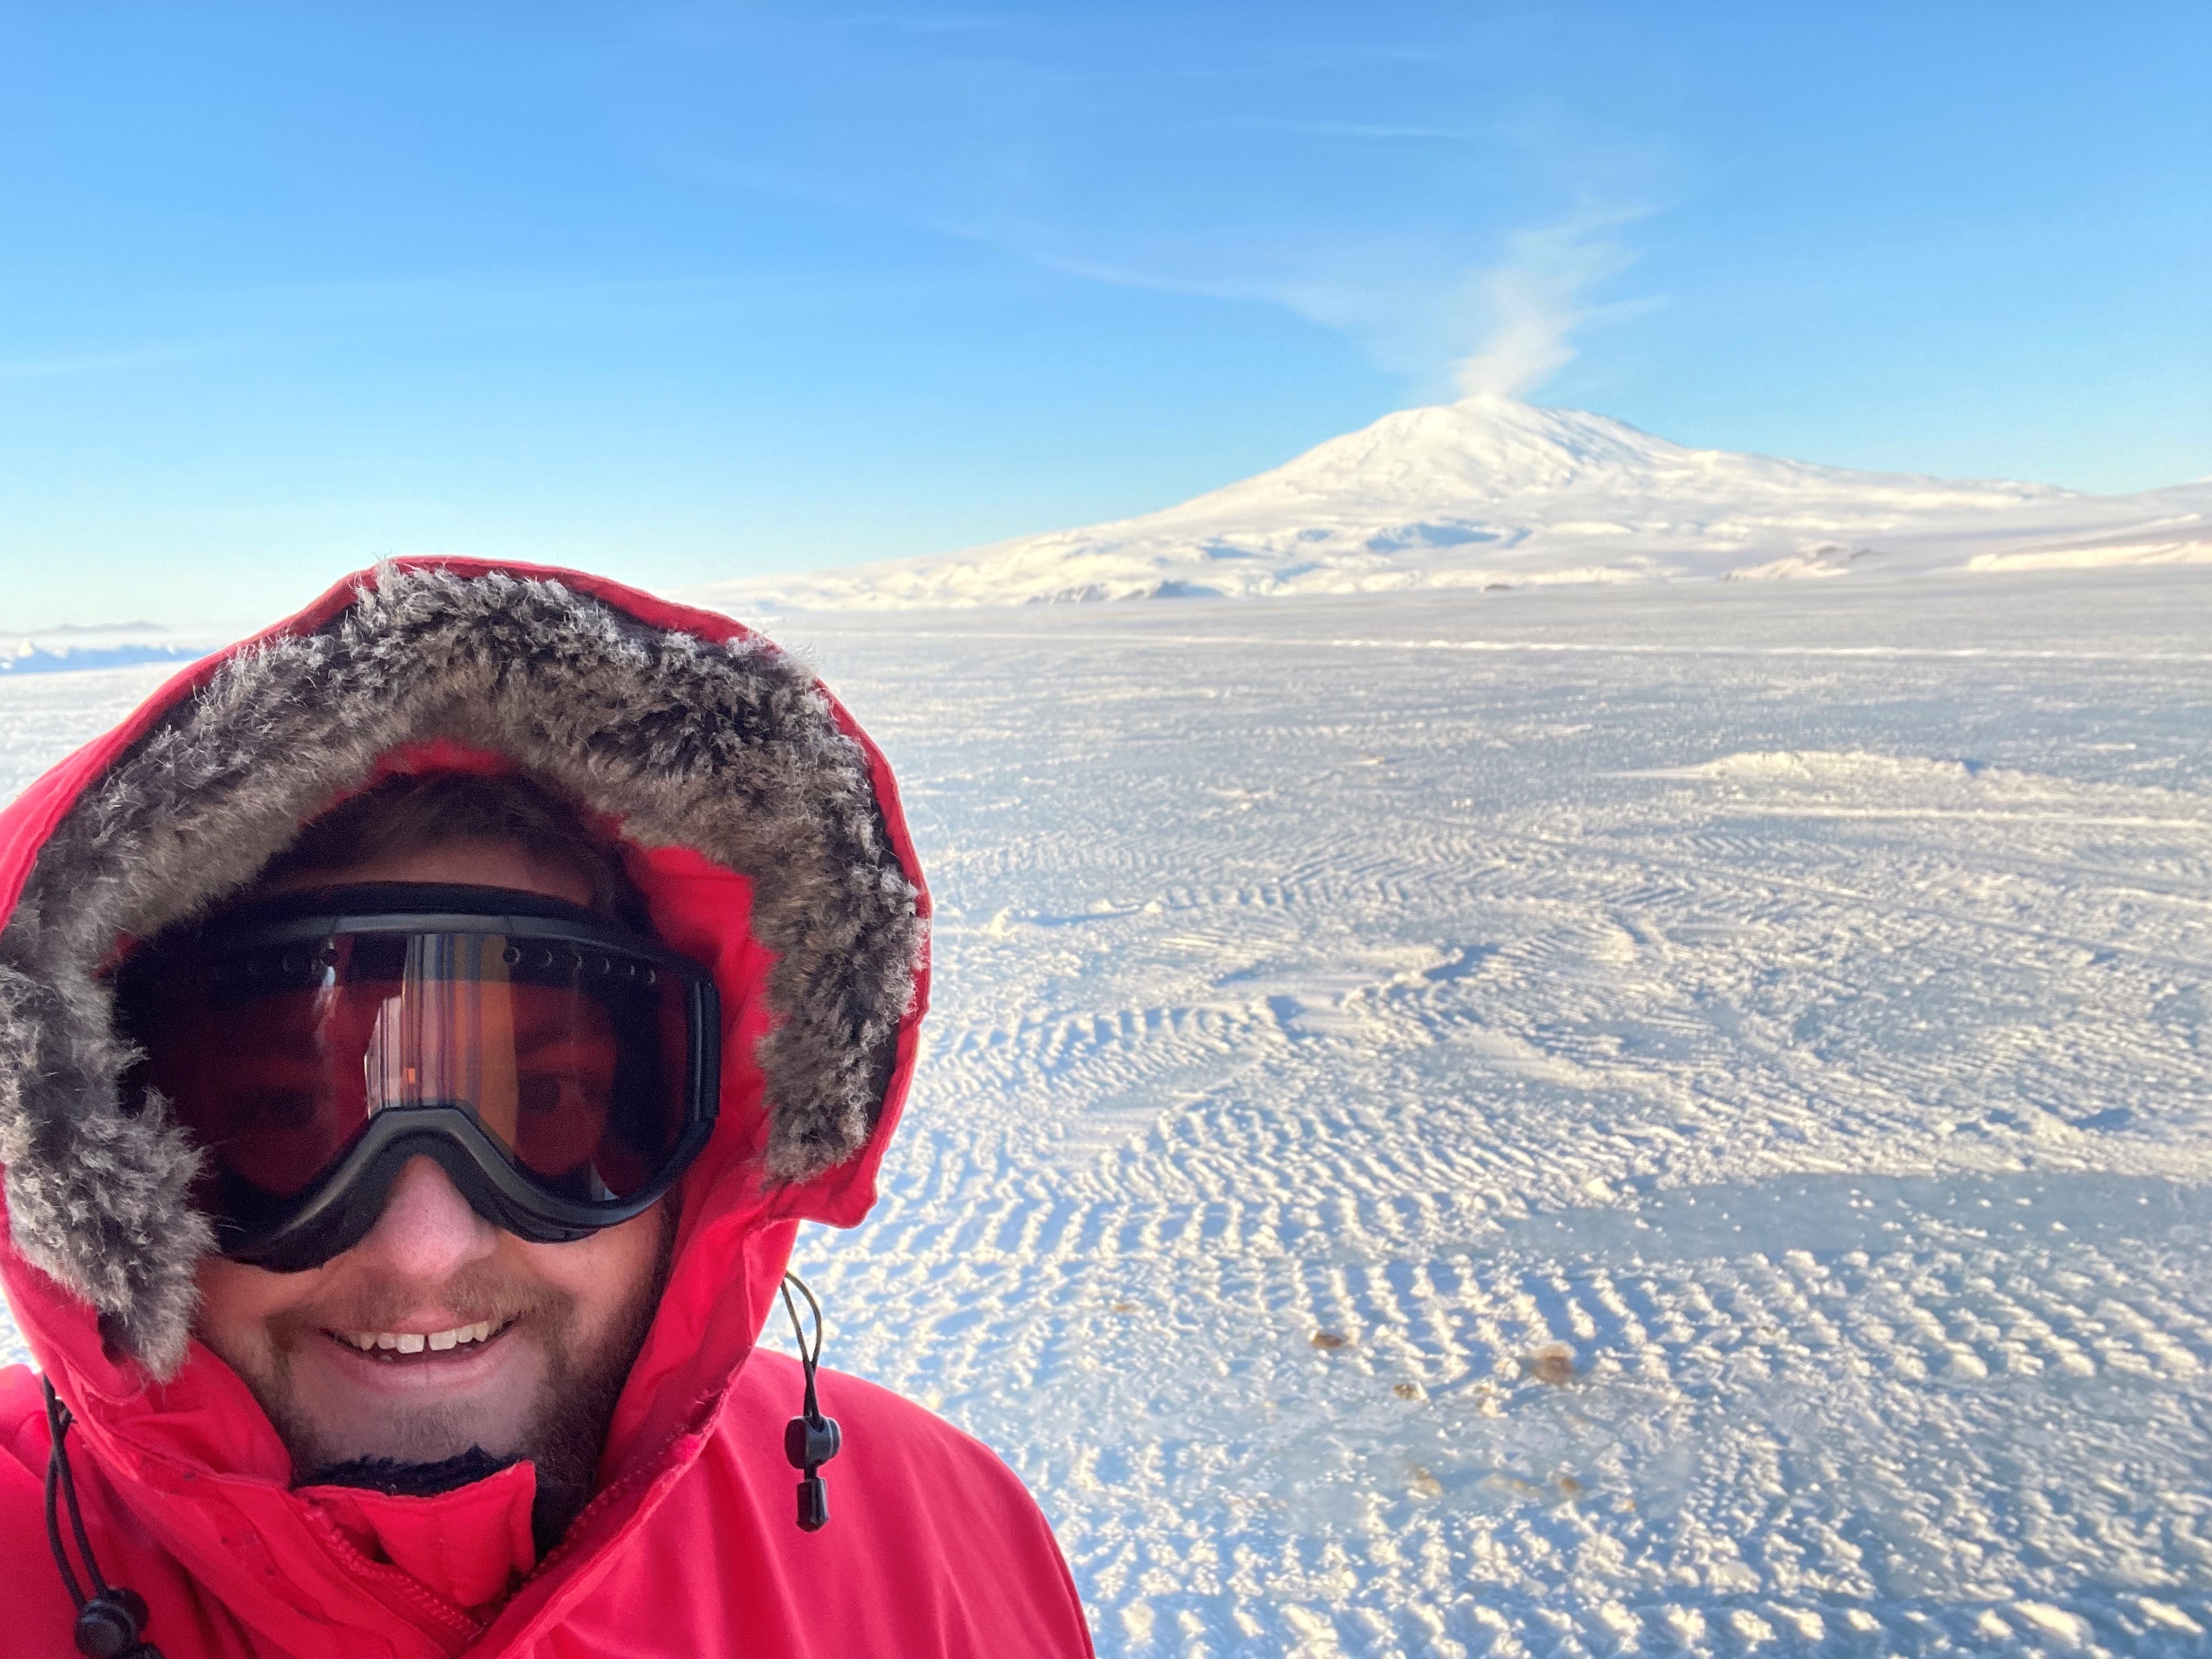 Carver College of Medicine alumnus Isaiah Reeves spent a one-month clinical rotation at the McMurdo research station as part of a combine aerospace and internal medicine residency training program at the University of Texas Medical Branch.